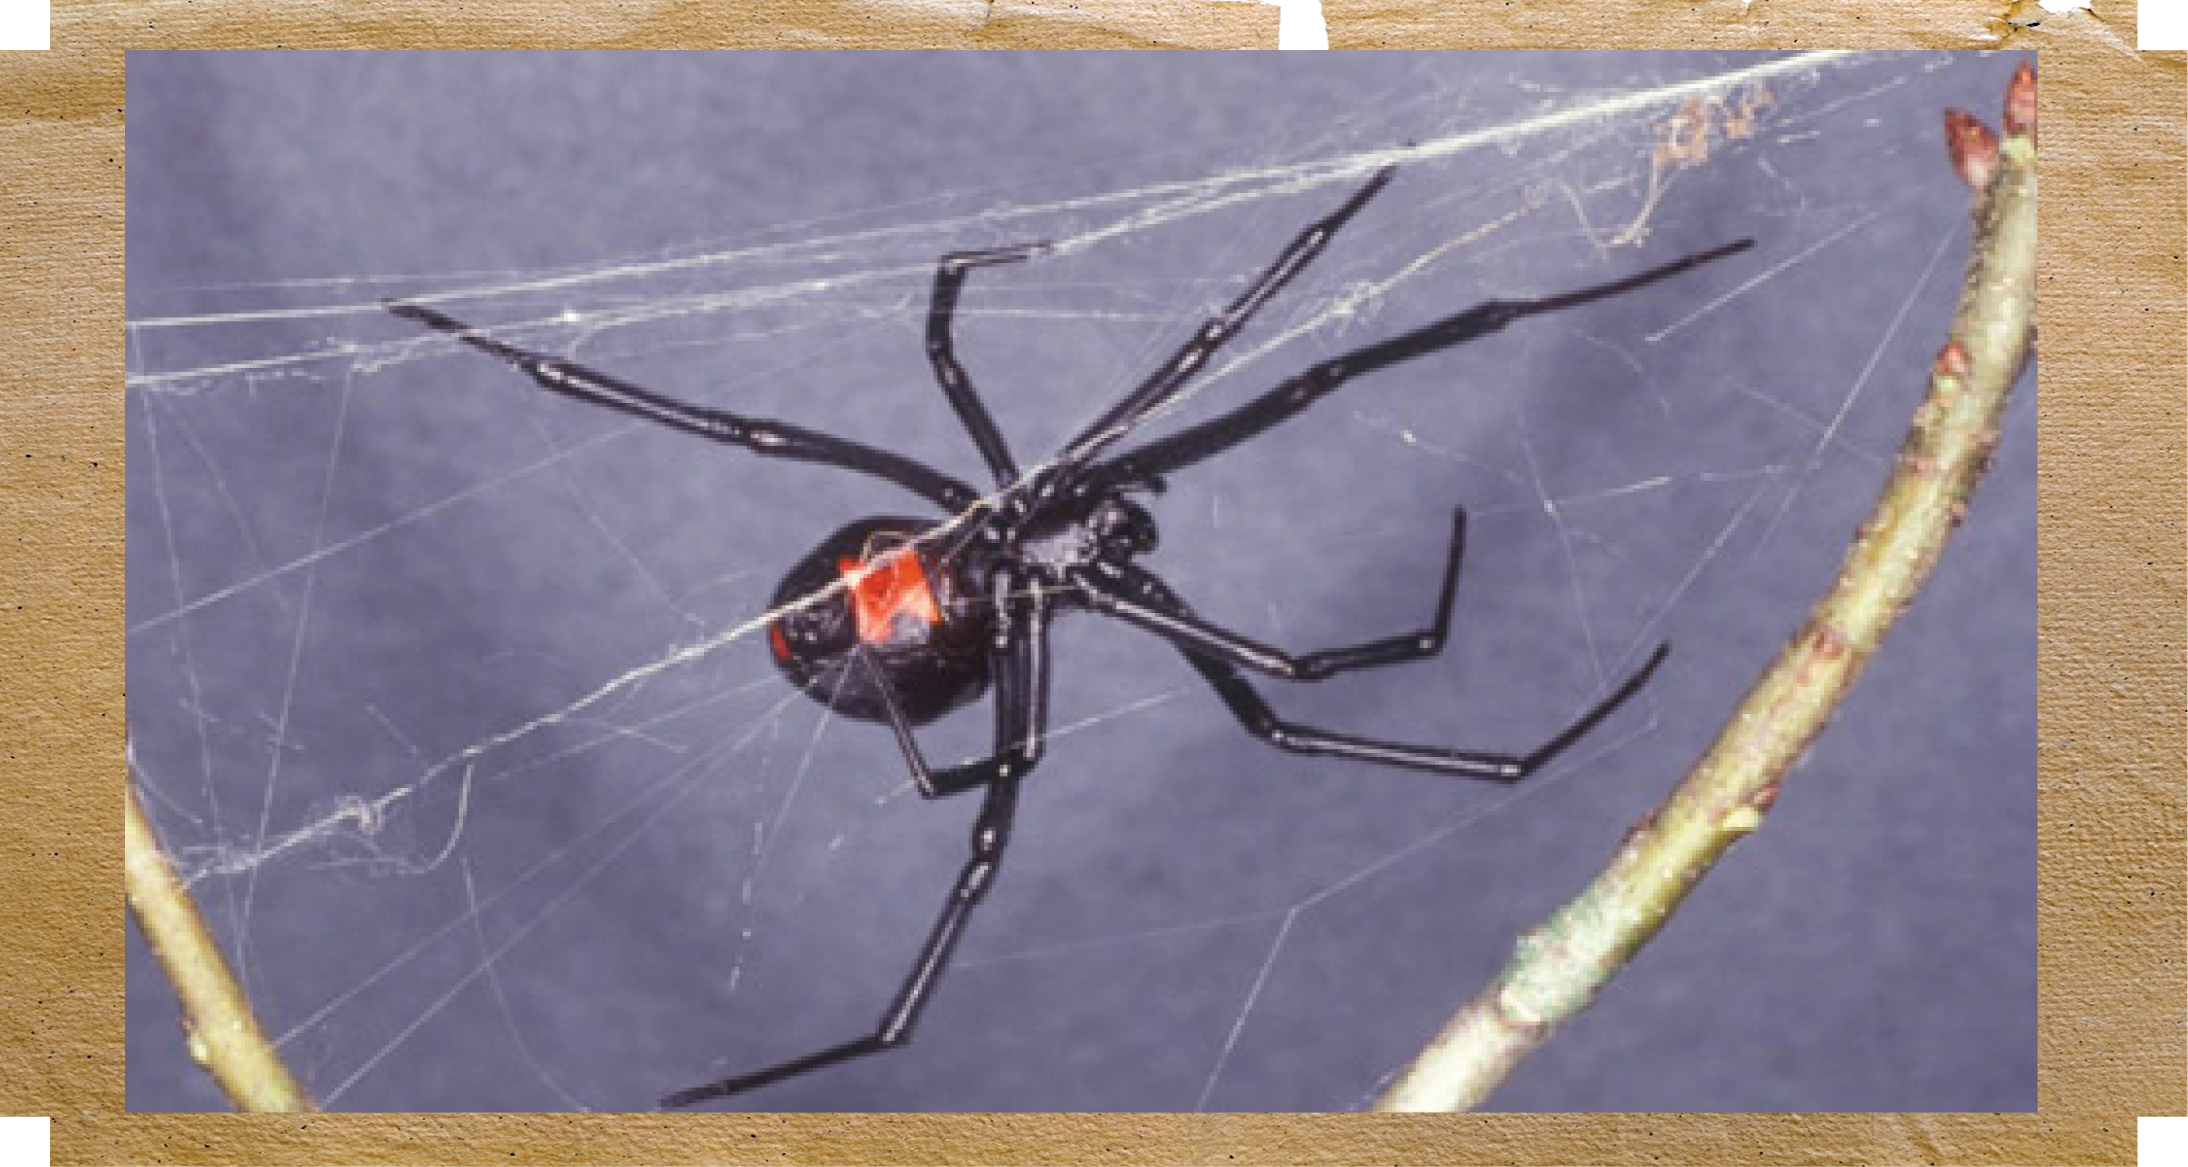  Adult female Southern black widow, Latrodectus mactans (Fabricius). The red Hour glass is clearly seen in it's abdomen.